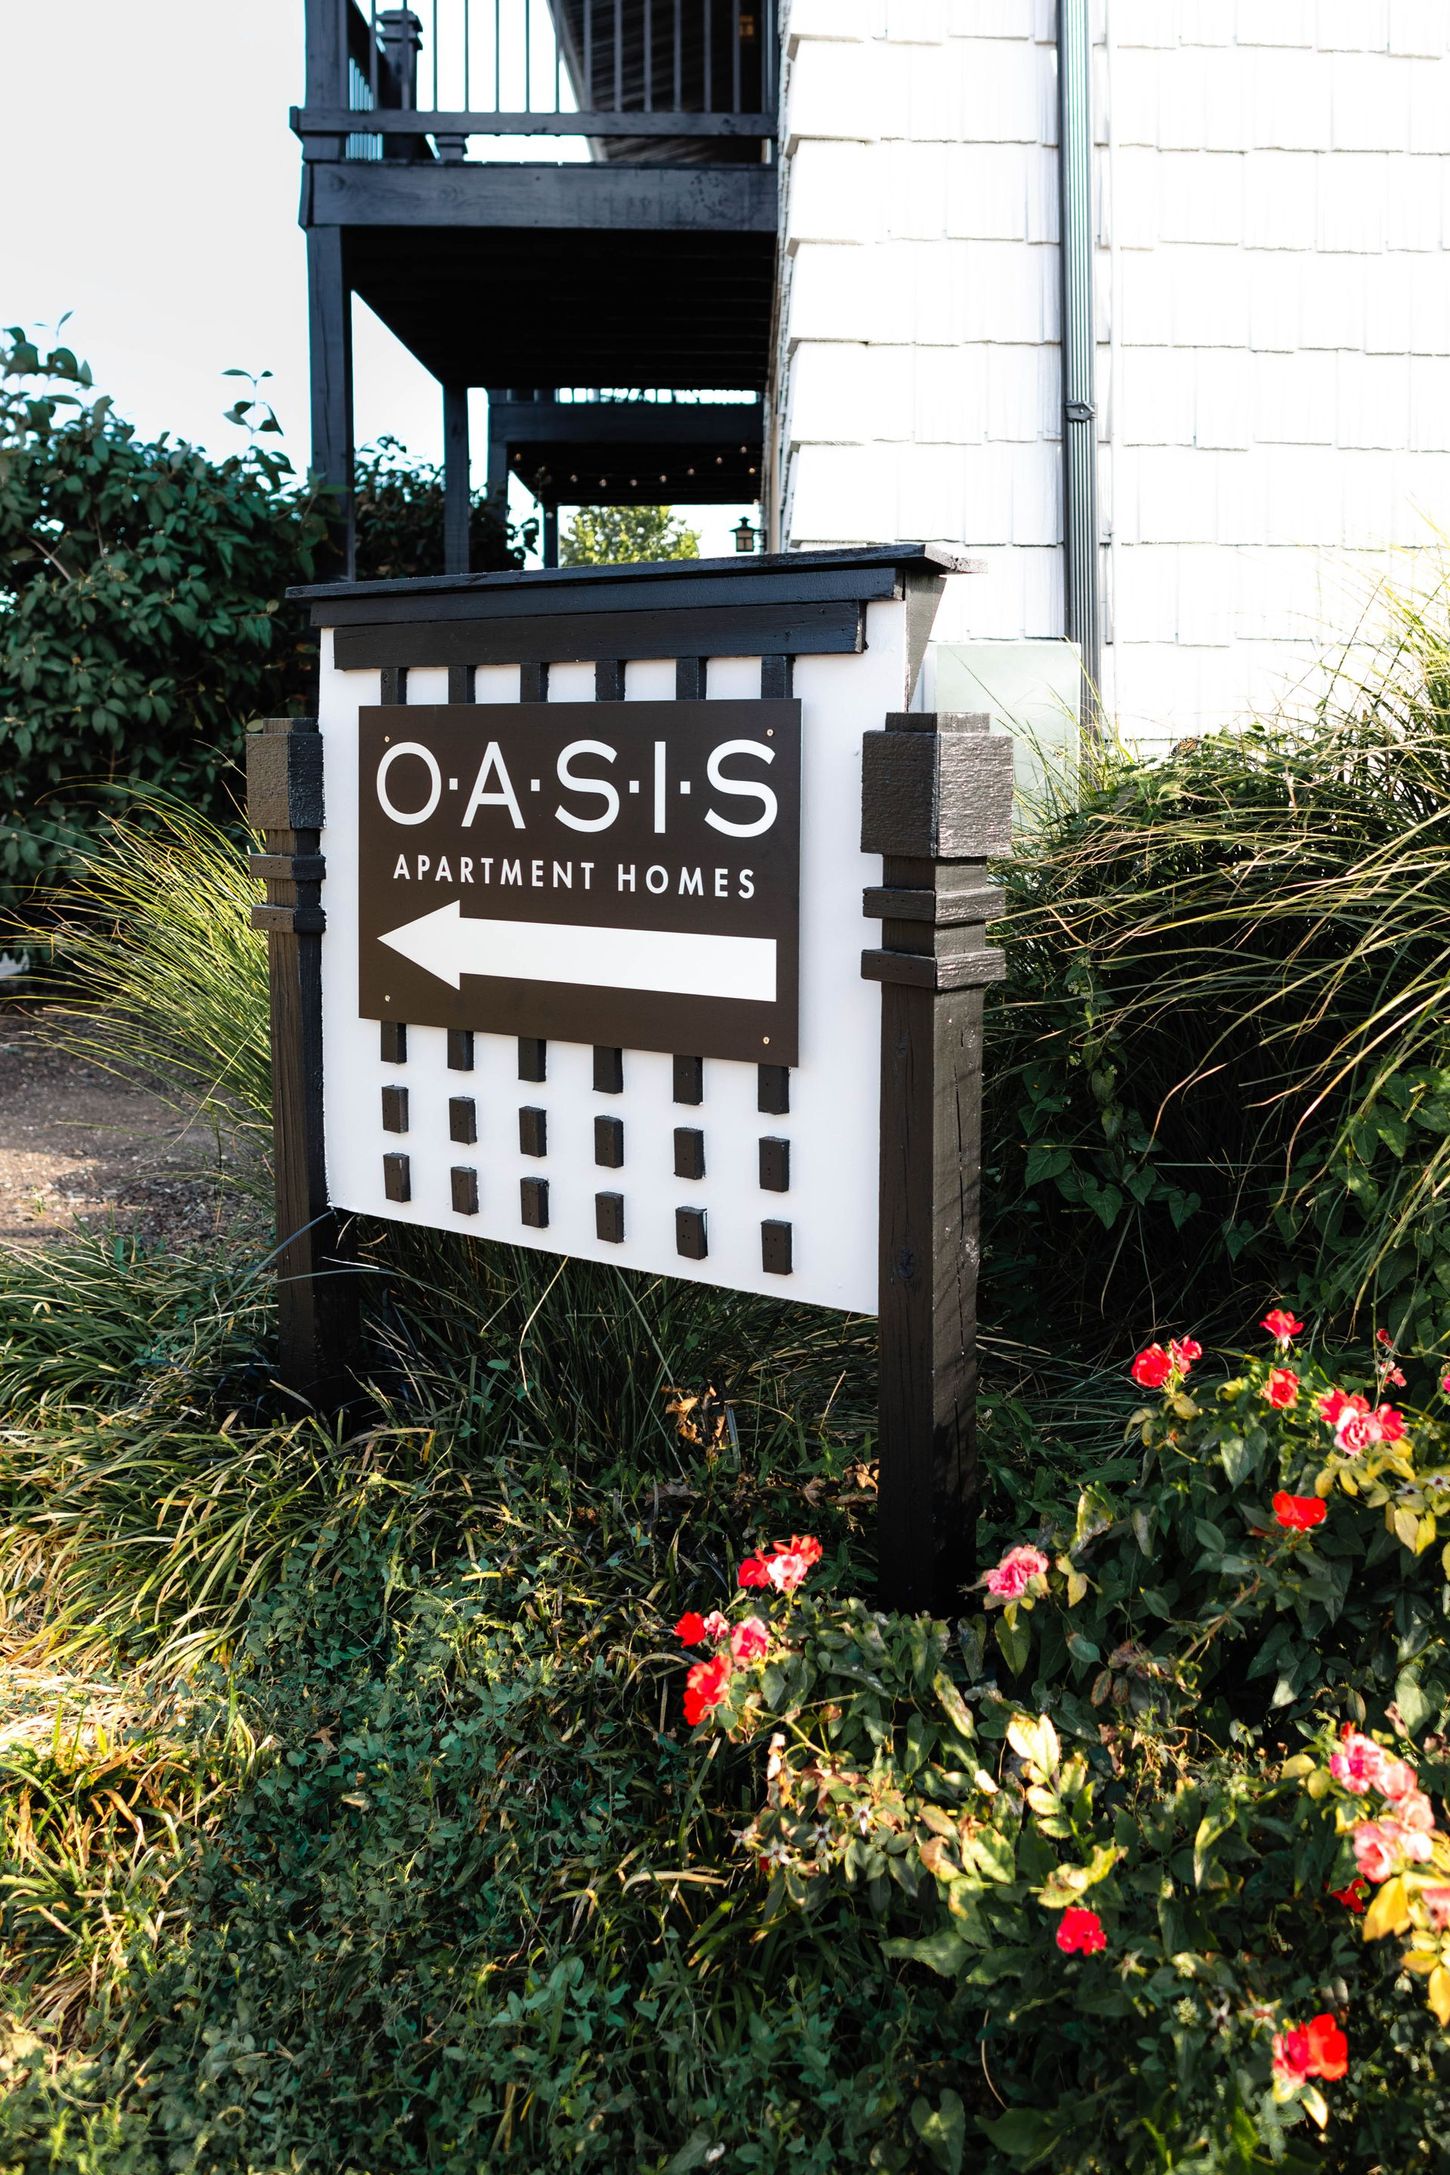 a sign for oasis apartment homes with an arrow pointing to the right